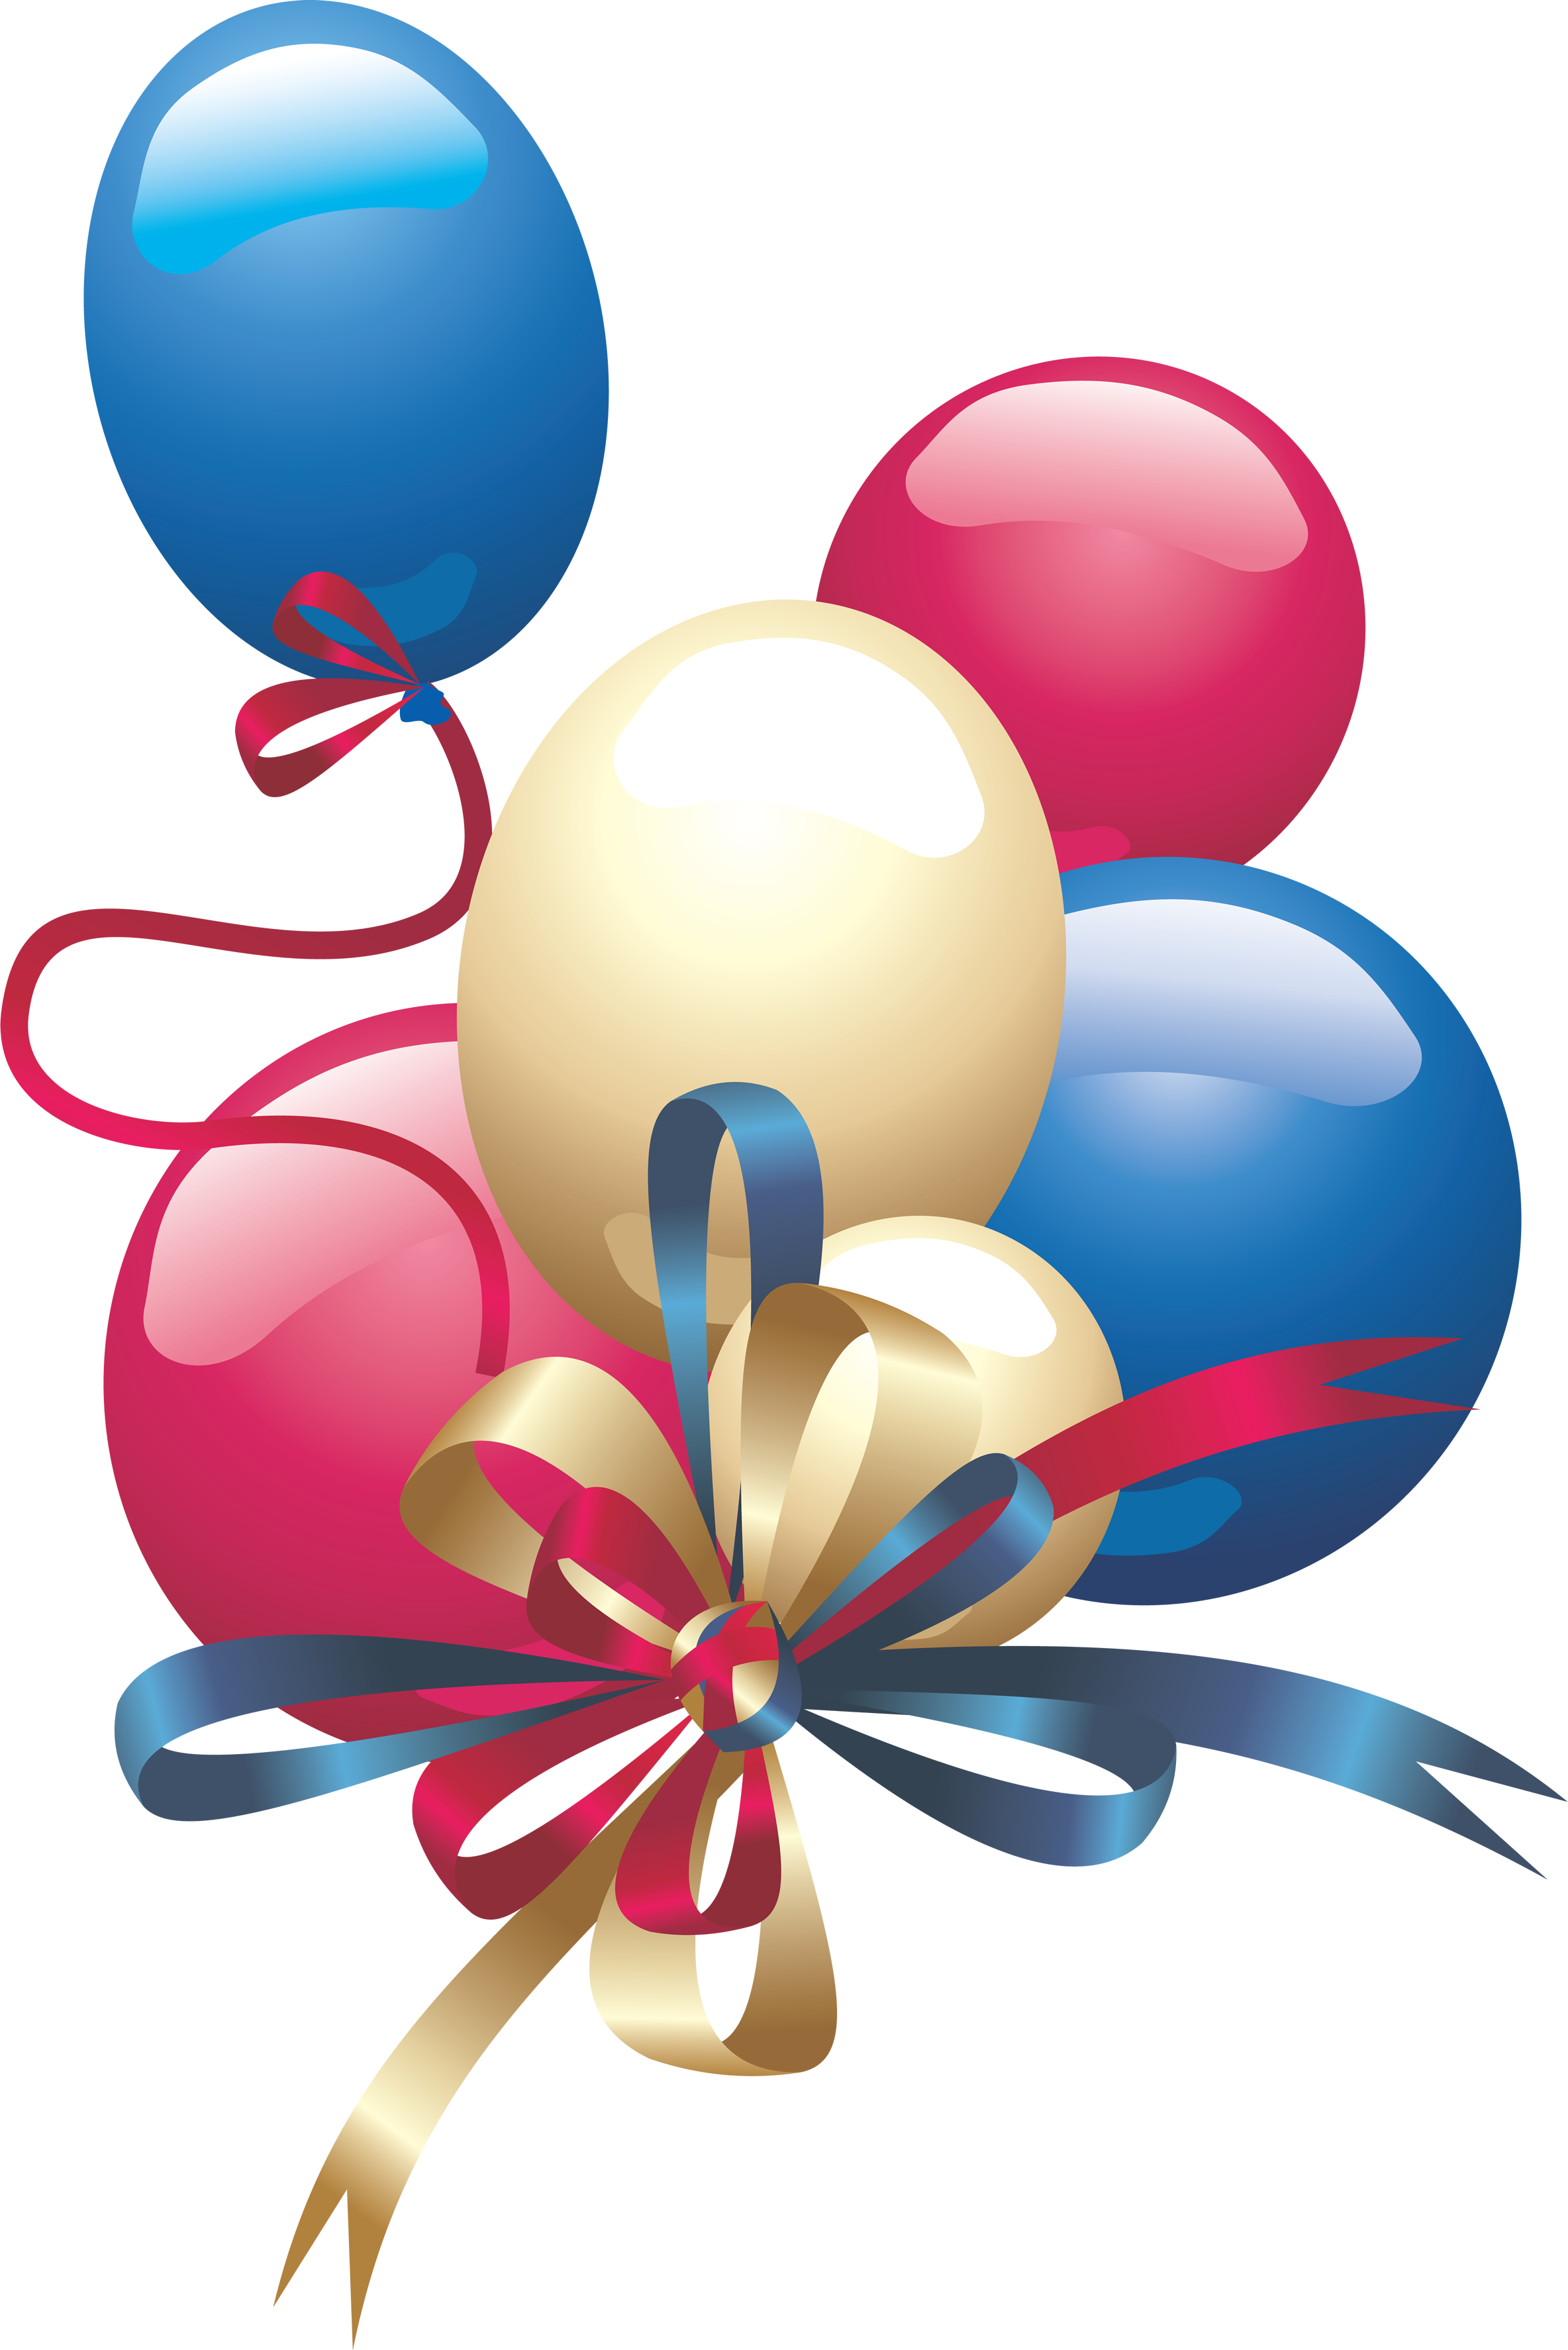 Party Festive Balloons PNG Image